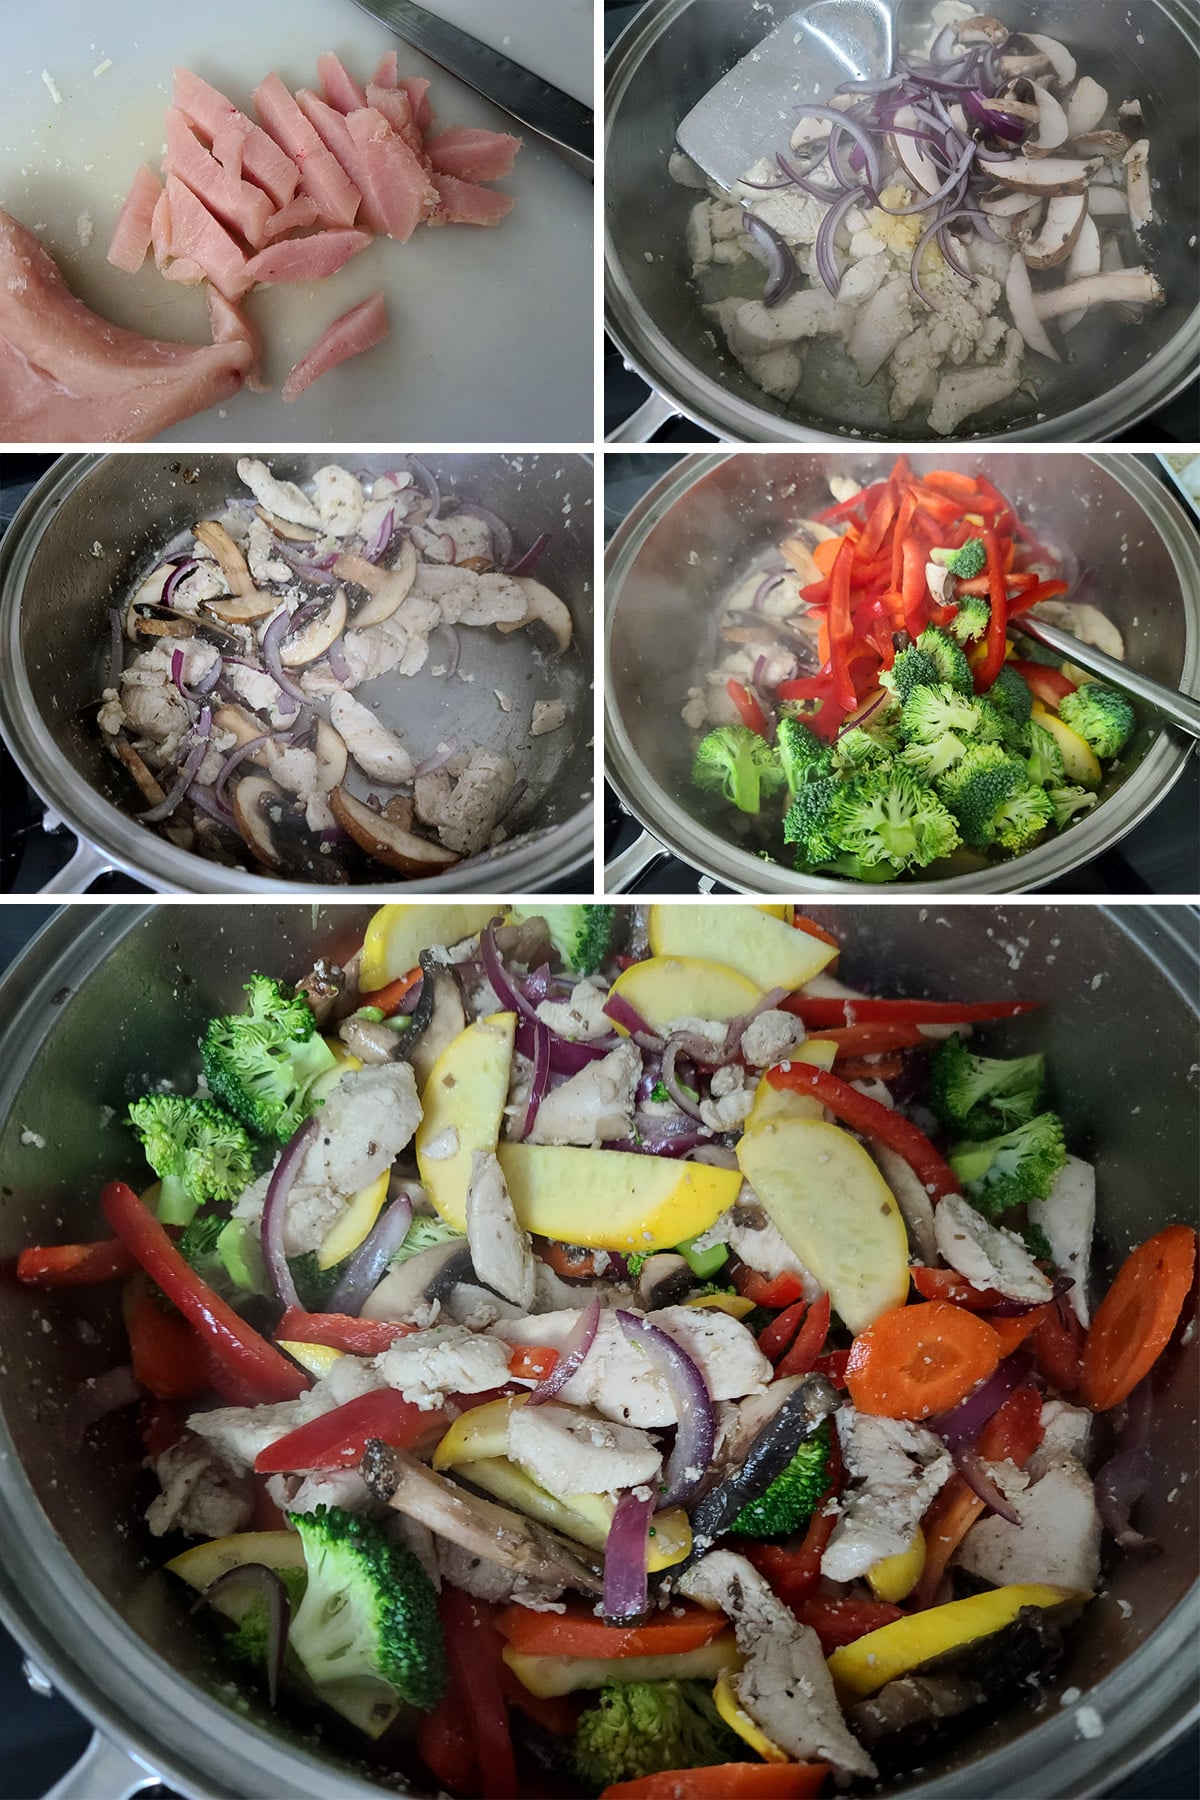 A 5 part image showing the chicken being cooked with the onions and mushrooms, then the rest of the veggies being added.